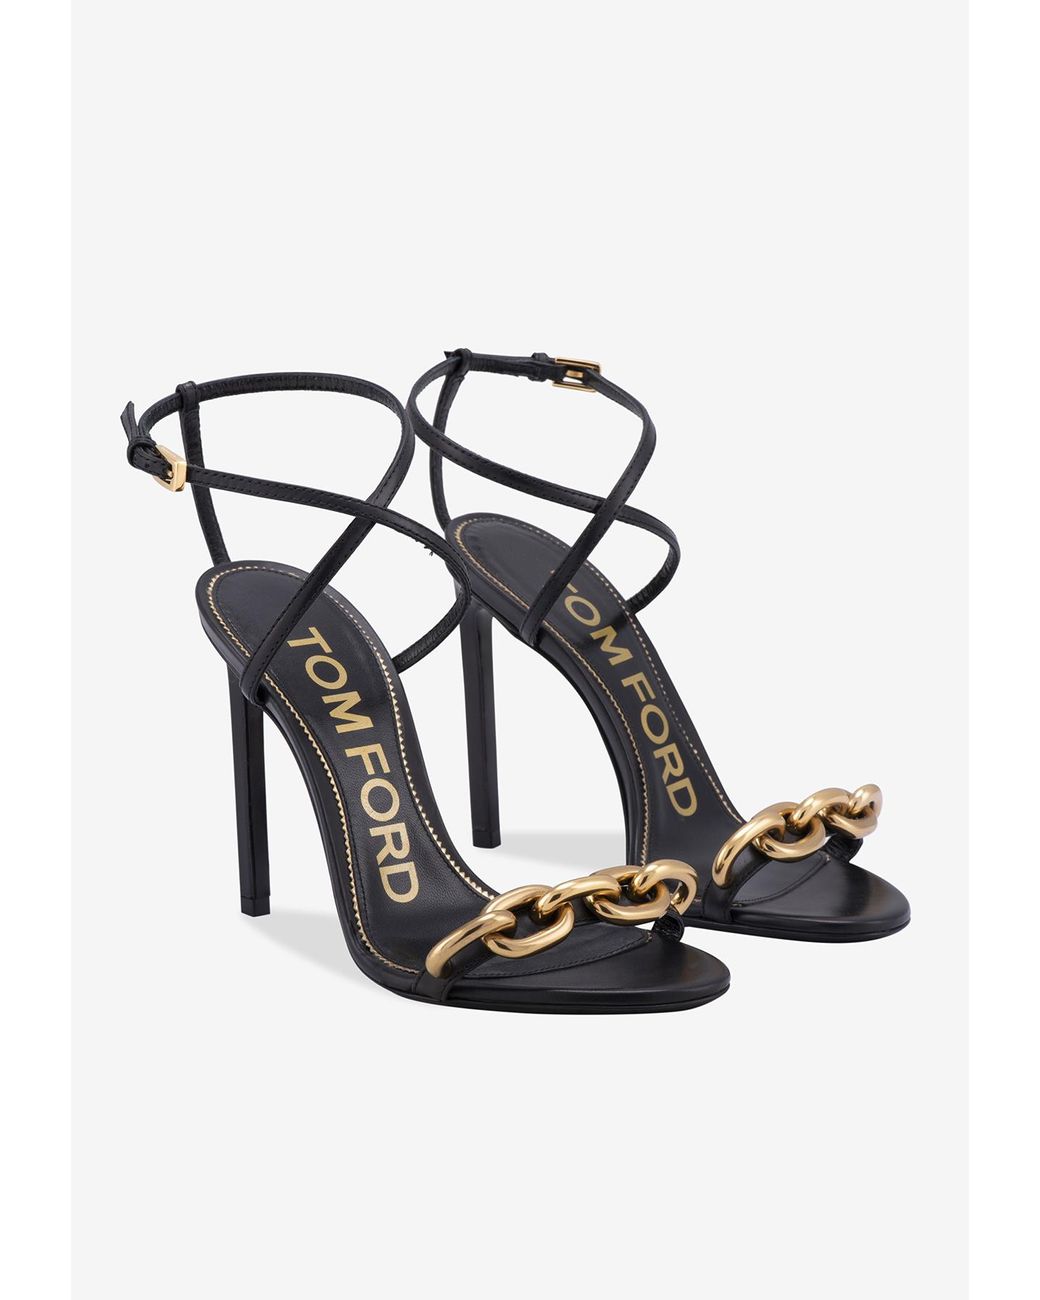 Tom Ford Leather Sandals With Chain Trim in Black | Lyst